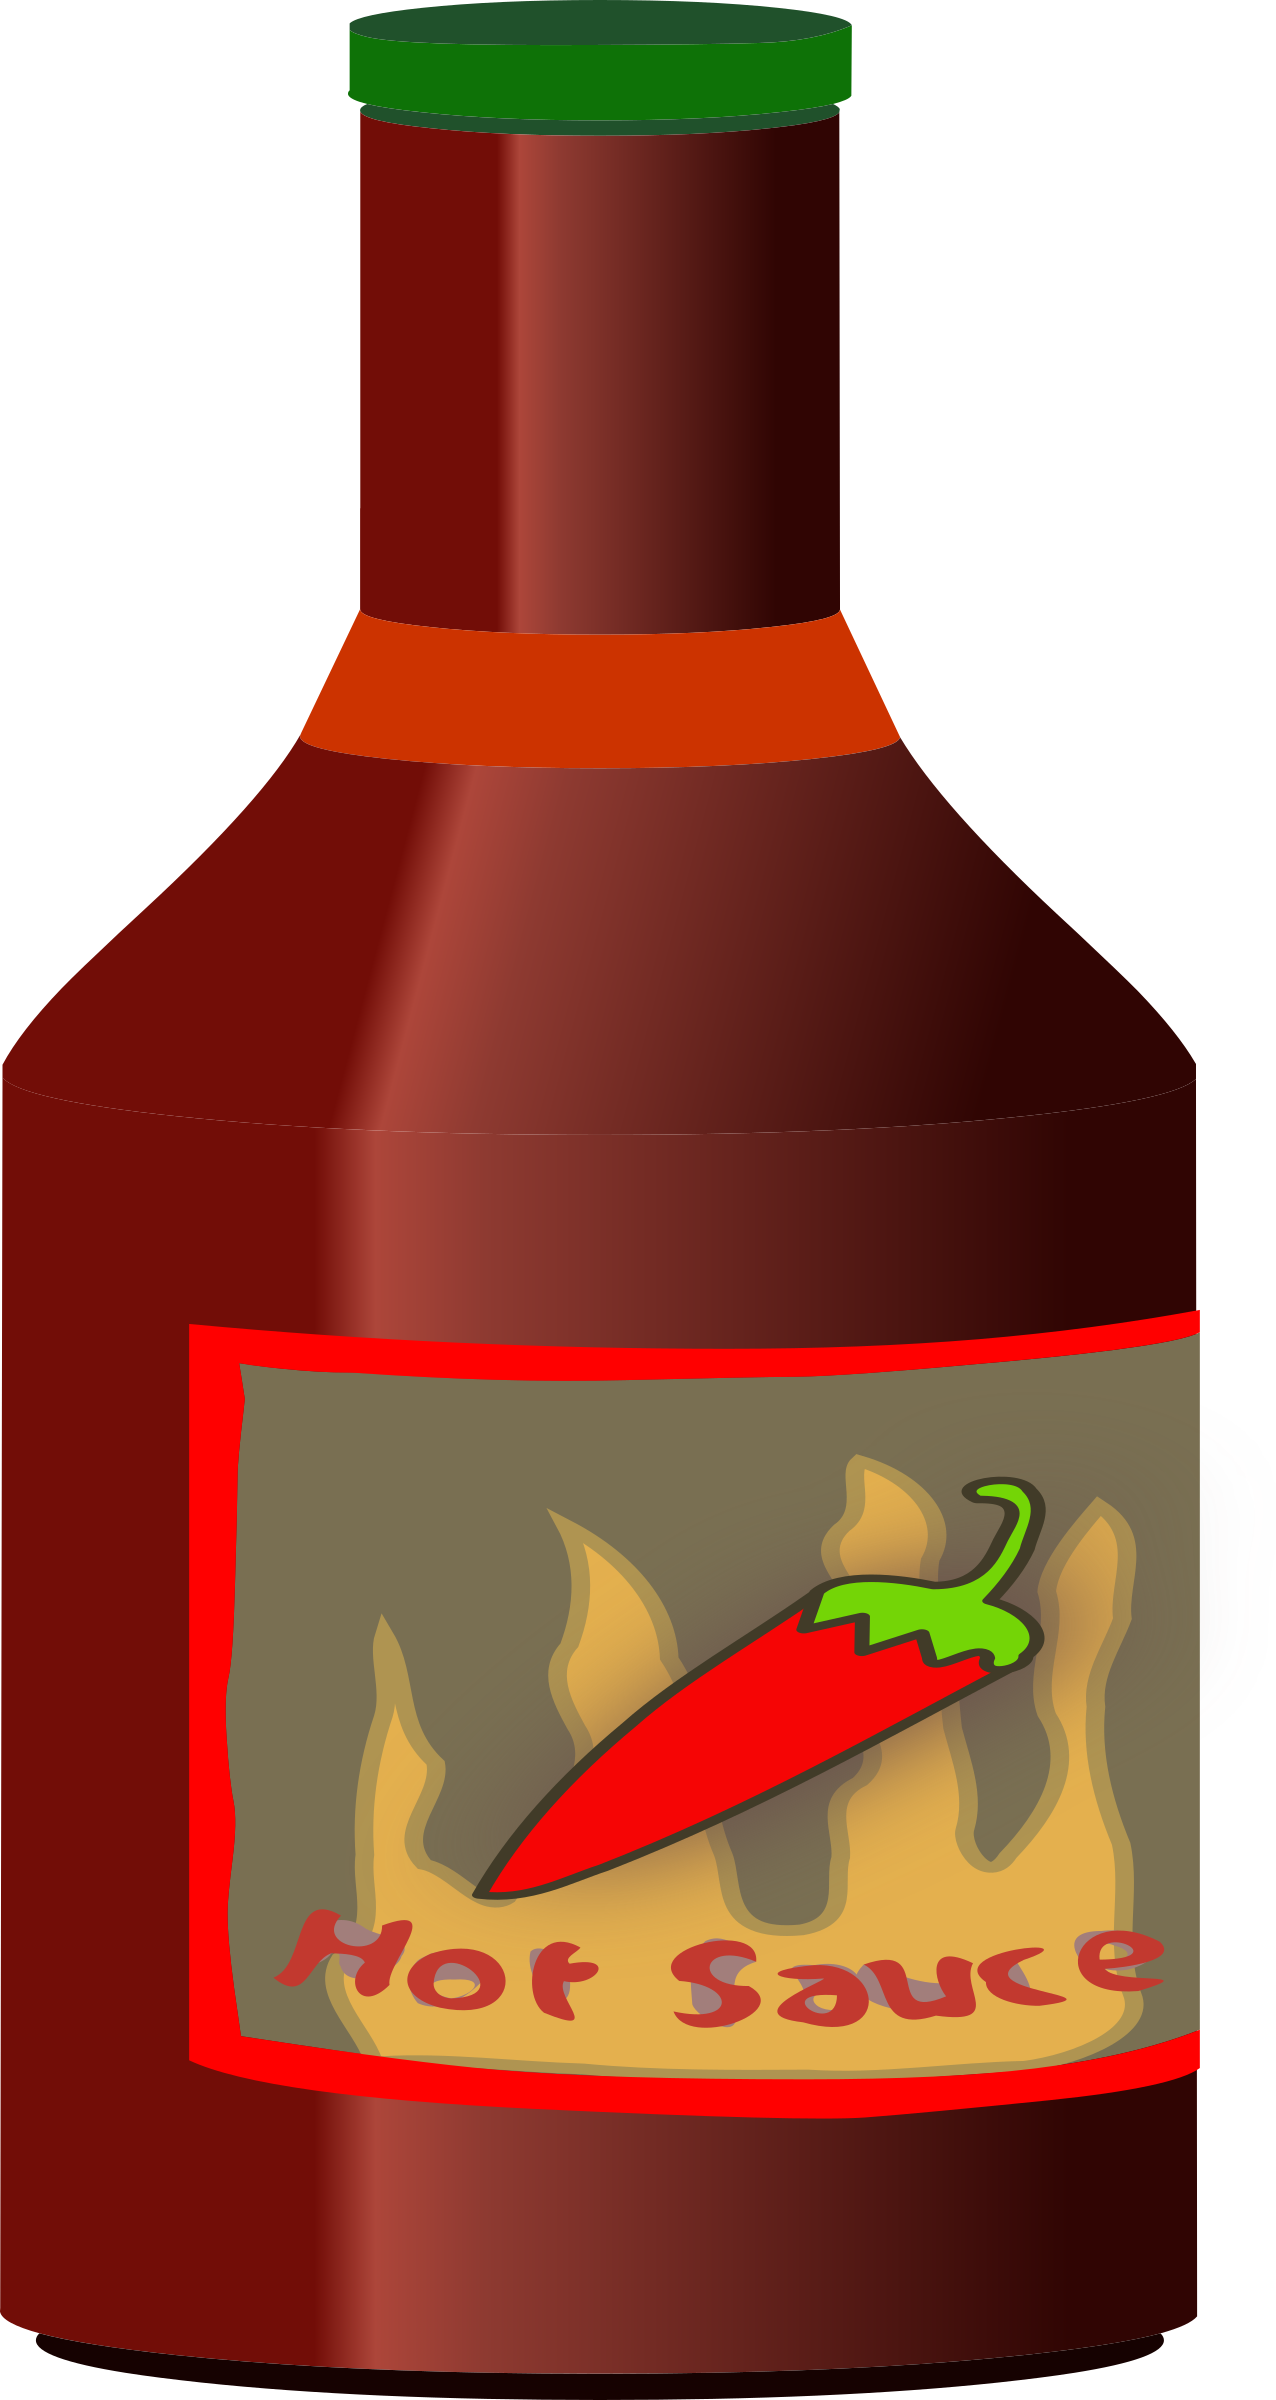 Bottle of hot sauce vector clipart image Free stock photo Public